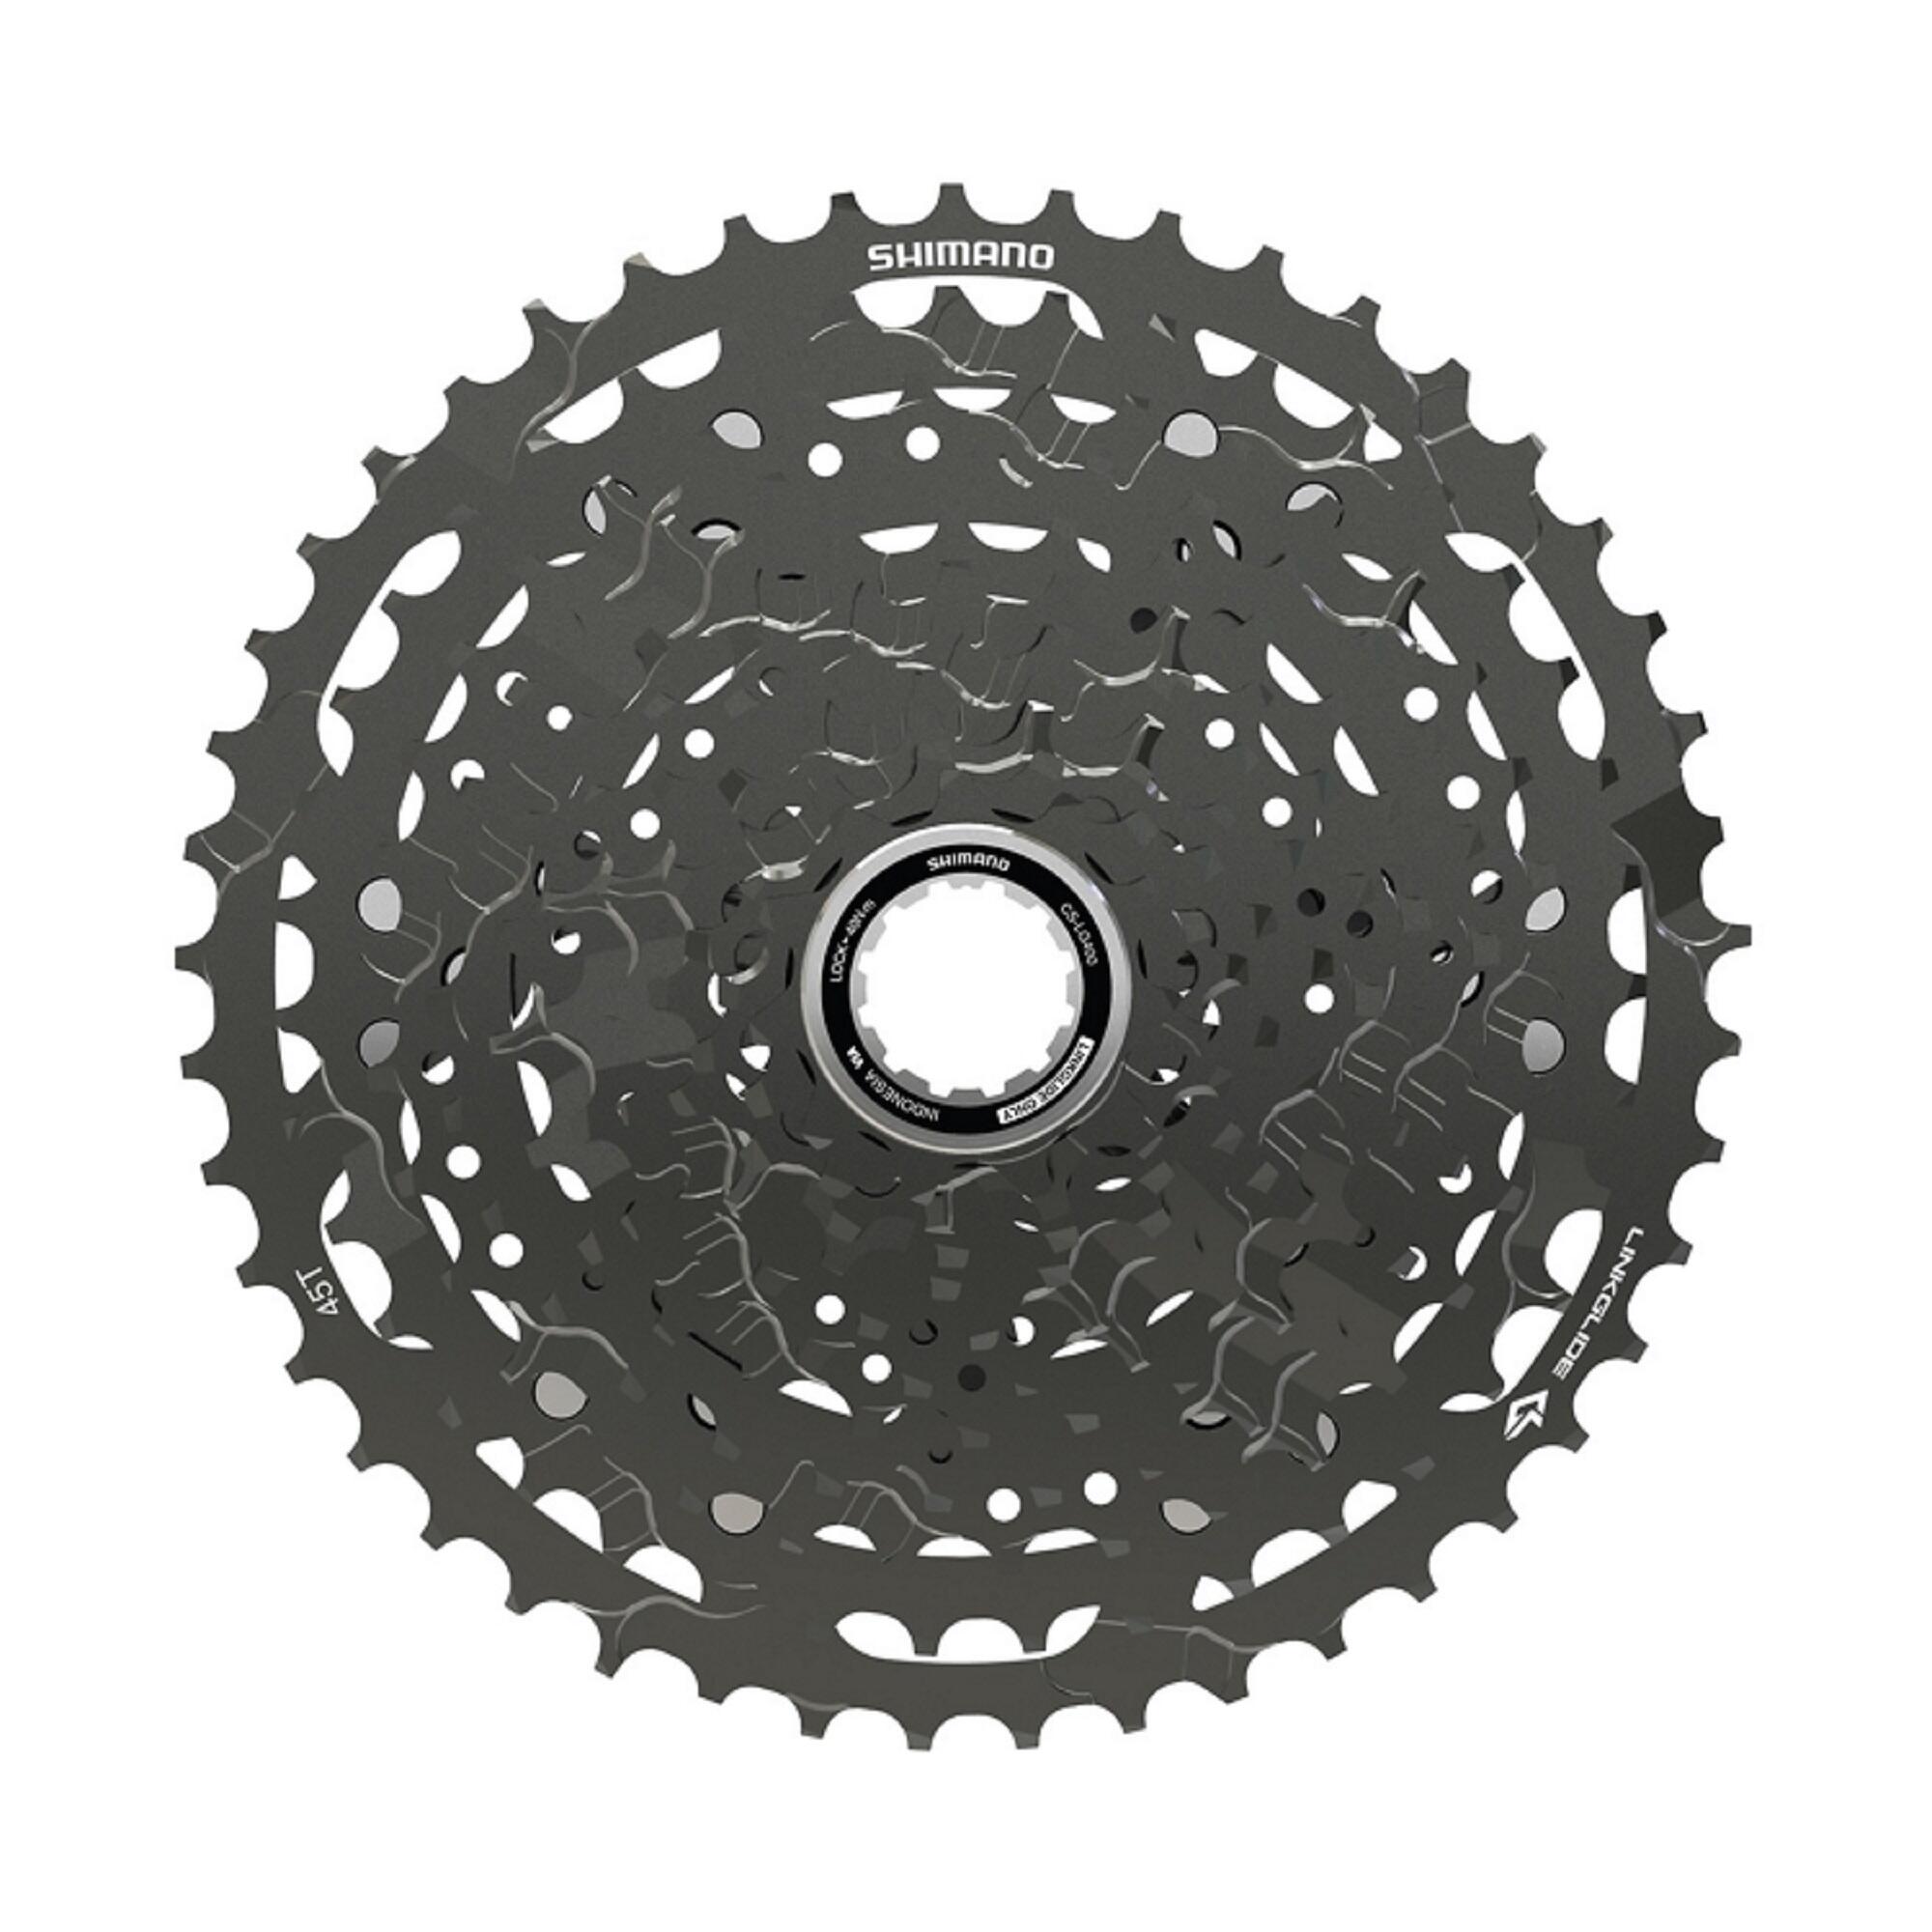 SHIMANO 11-Speed 11x50 Cassette Cues LG400